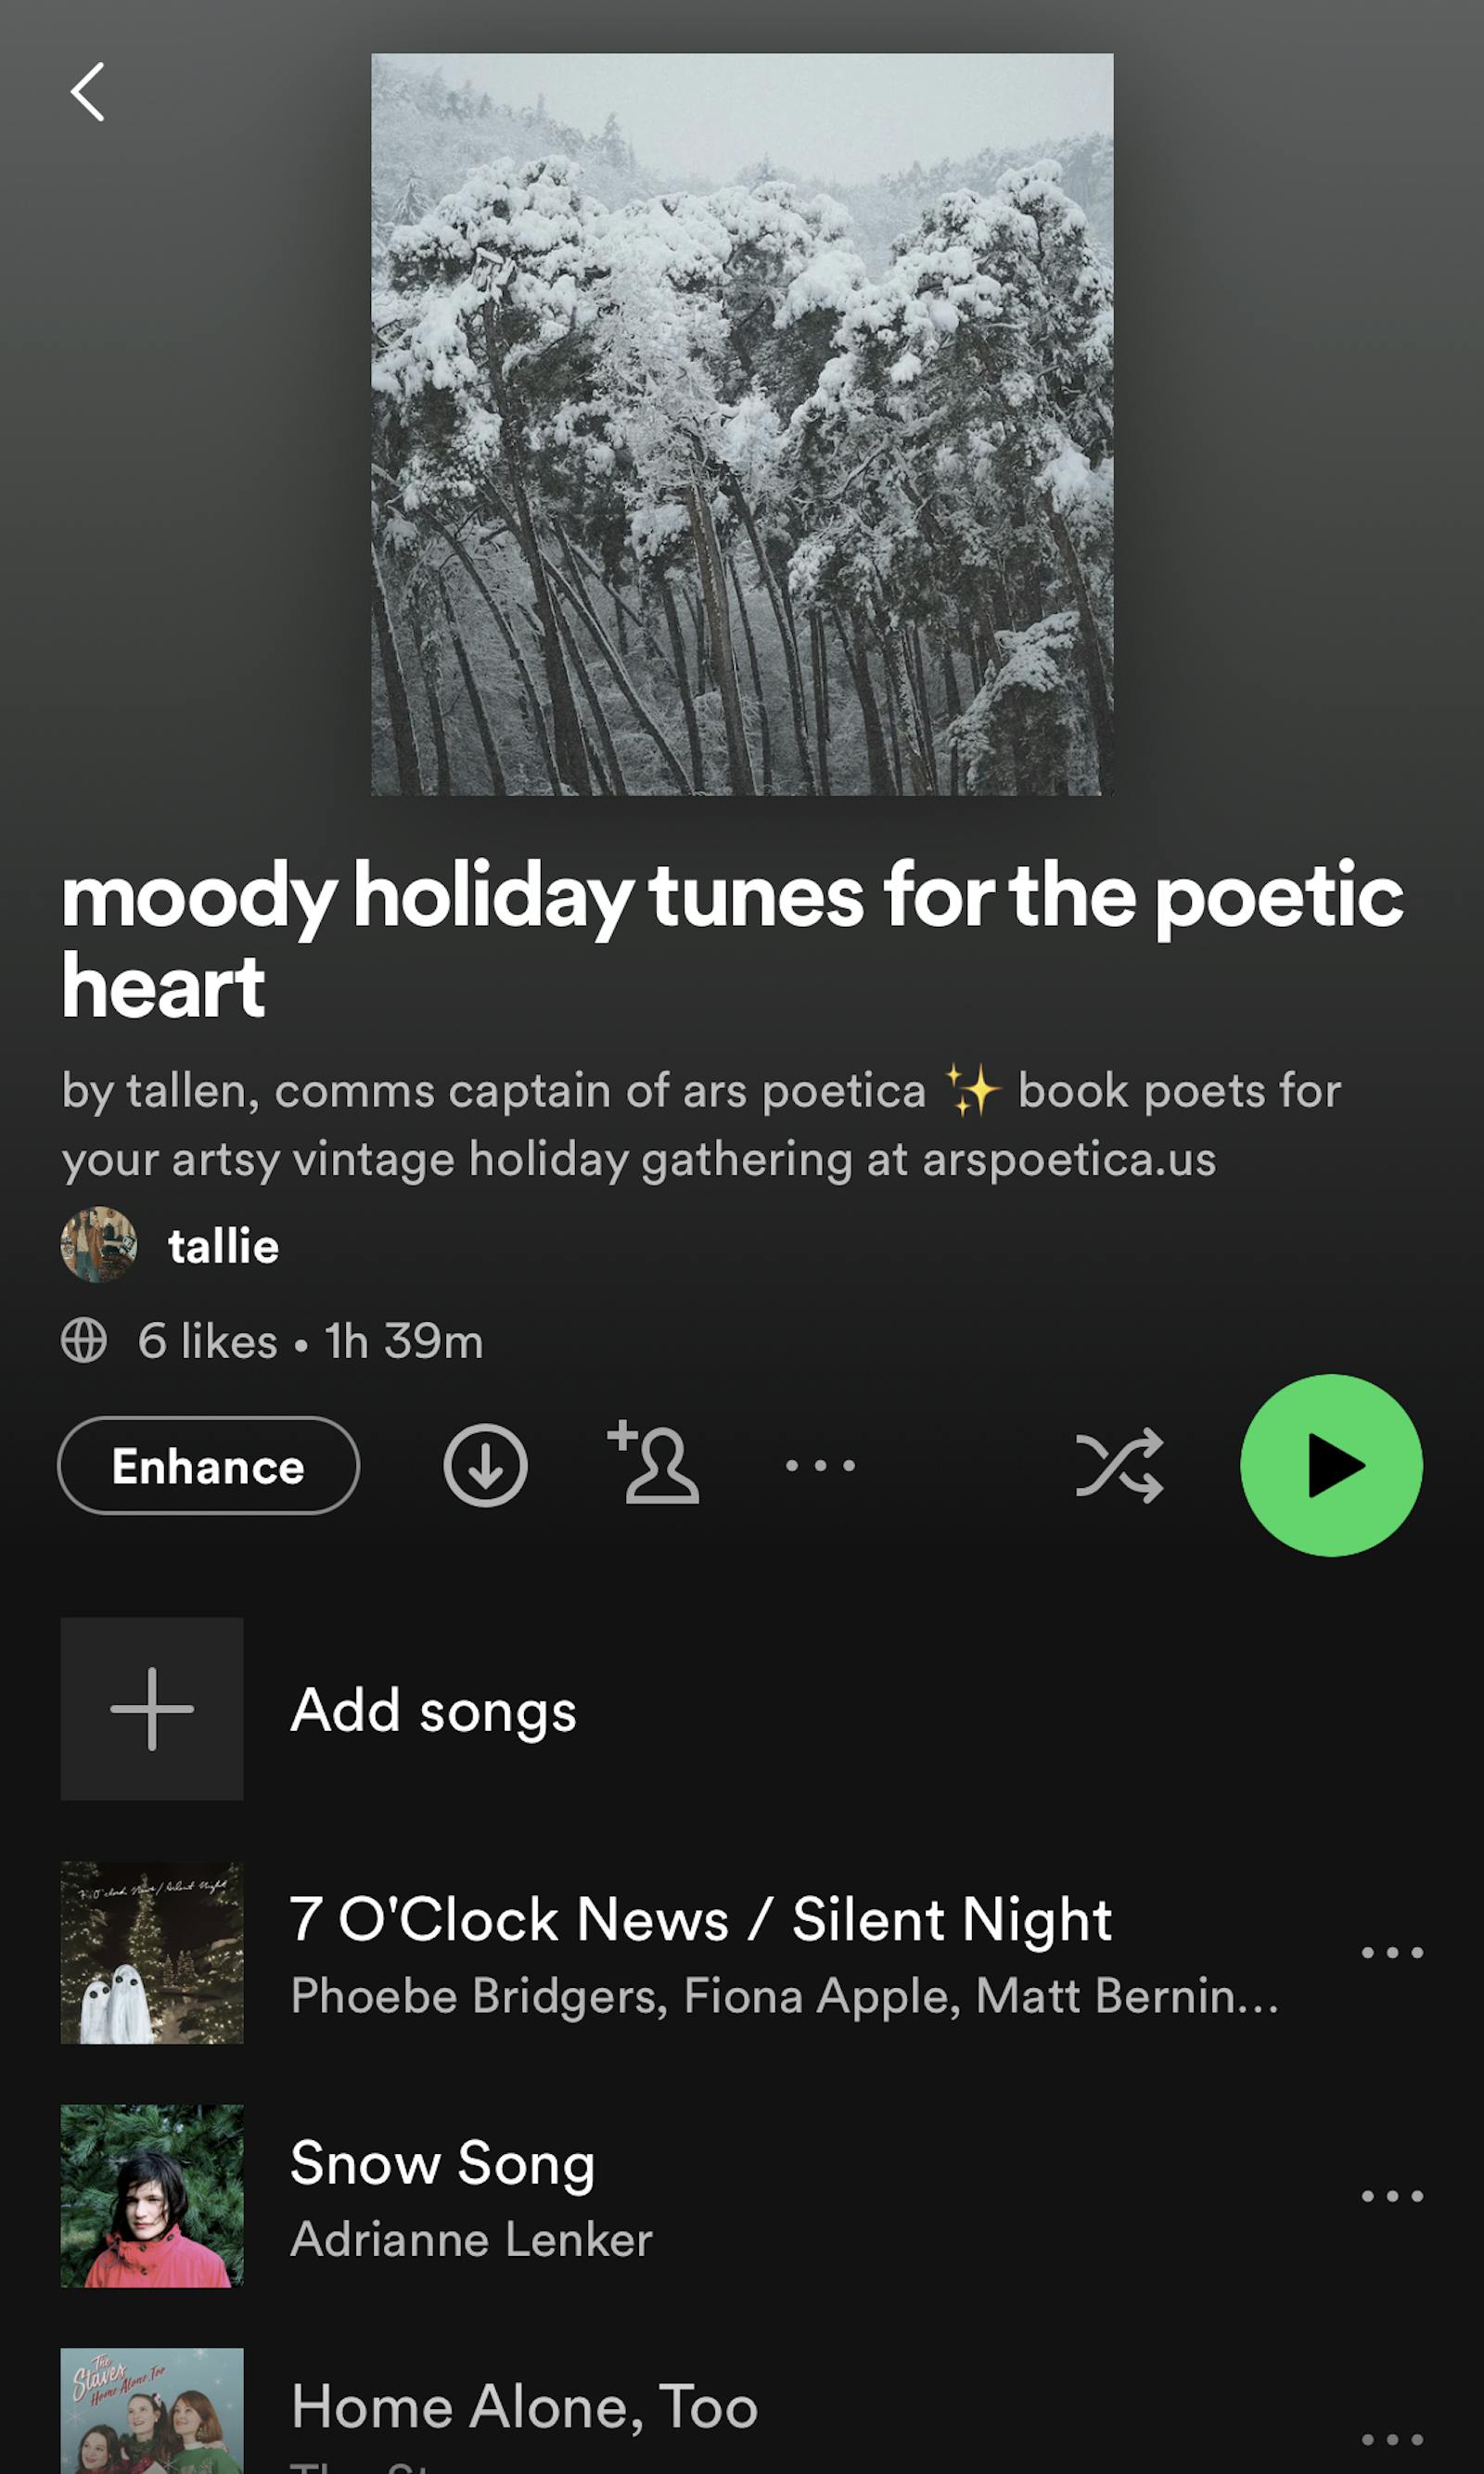 moody holiday tunes for the poetic heart